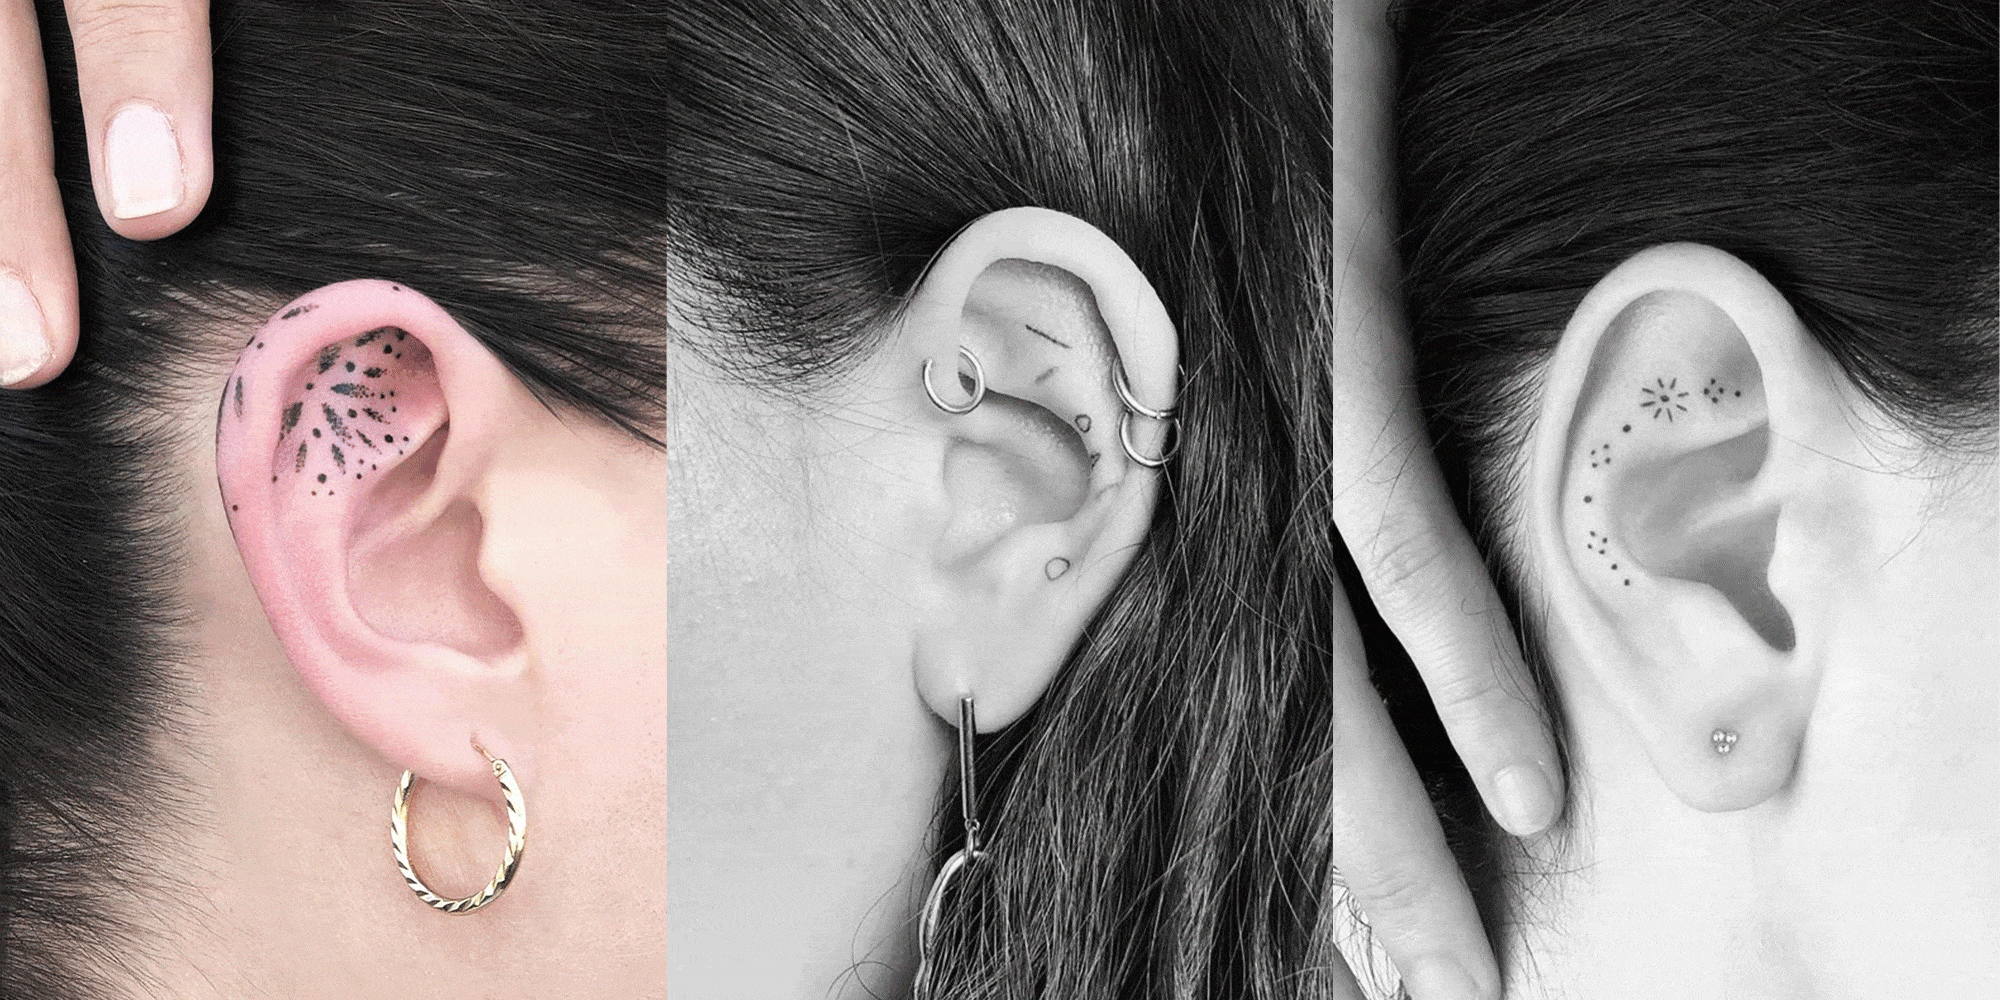 25 Ear Tattoos You Are Going to Love ...